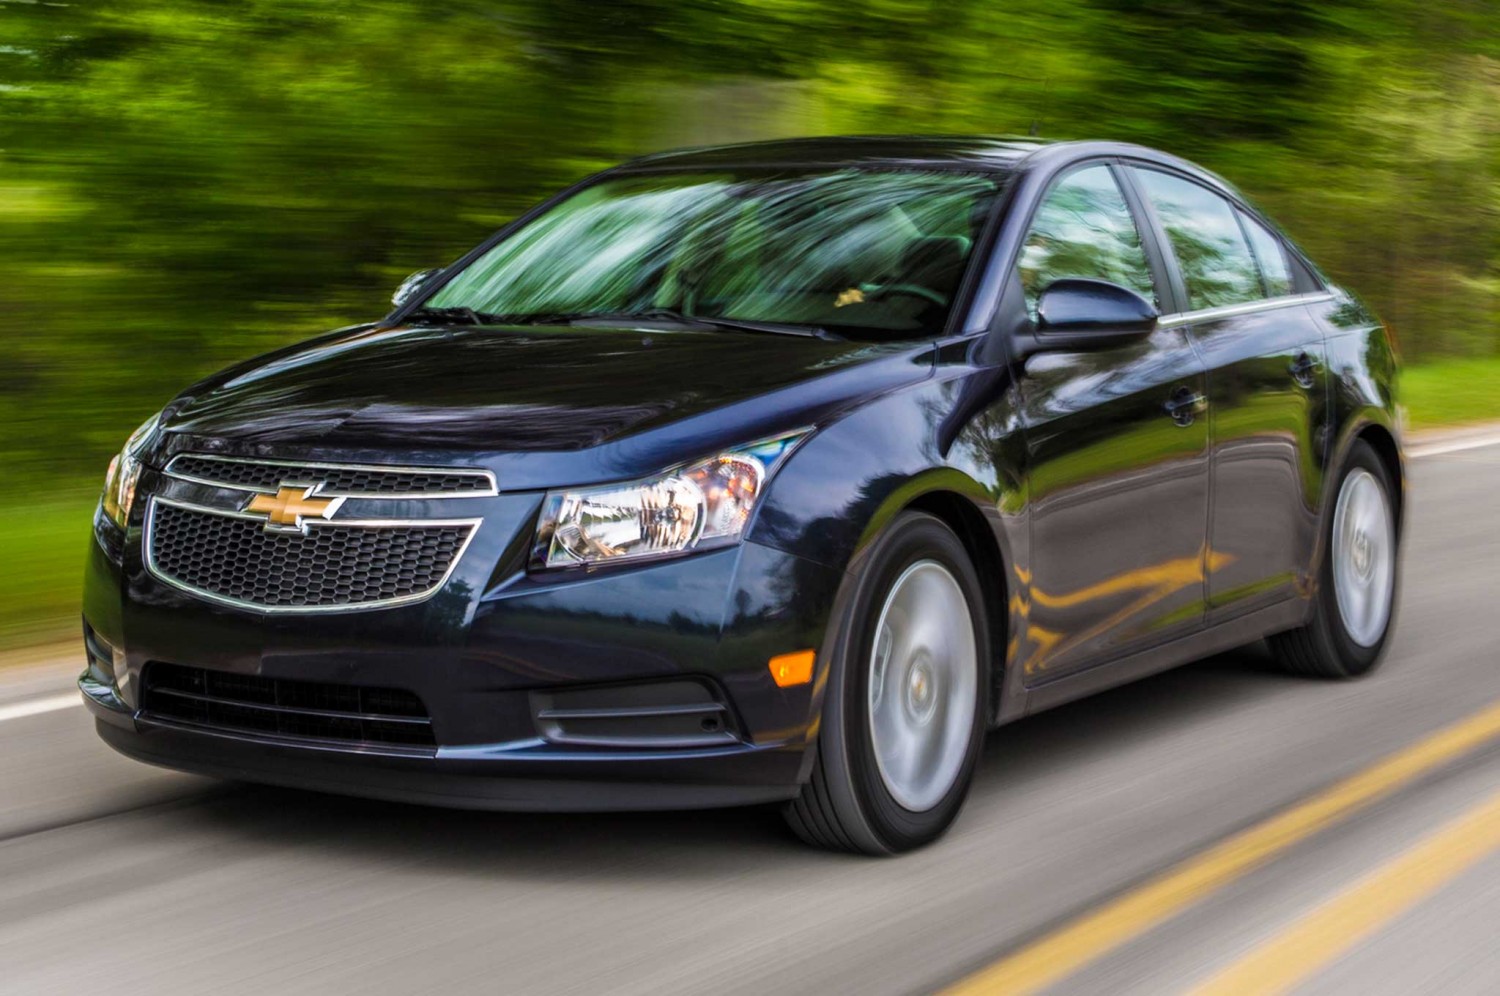 GM Issues Chevy Cruze Recall Affecting 293,000 Vehicles